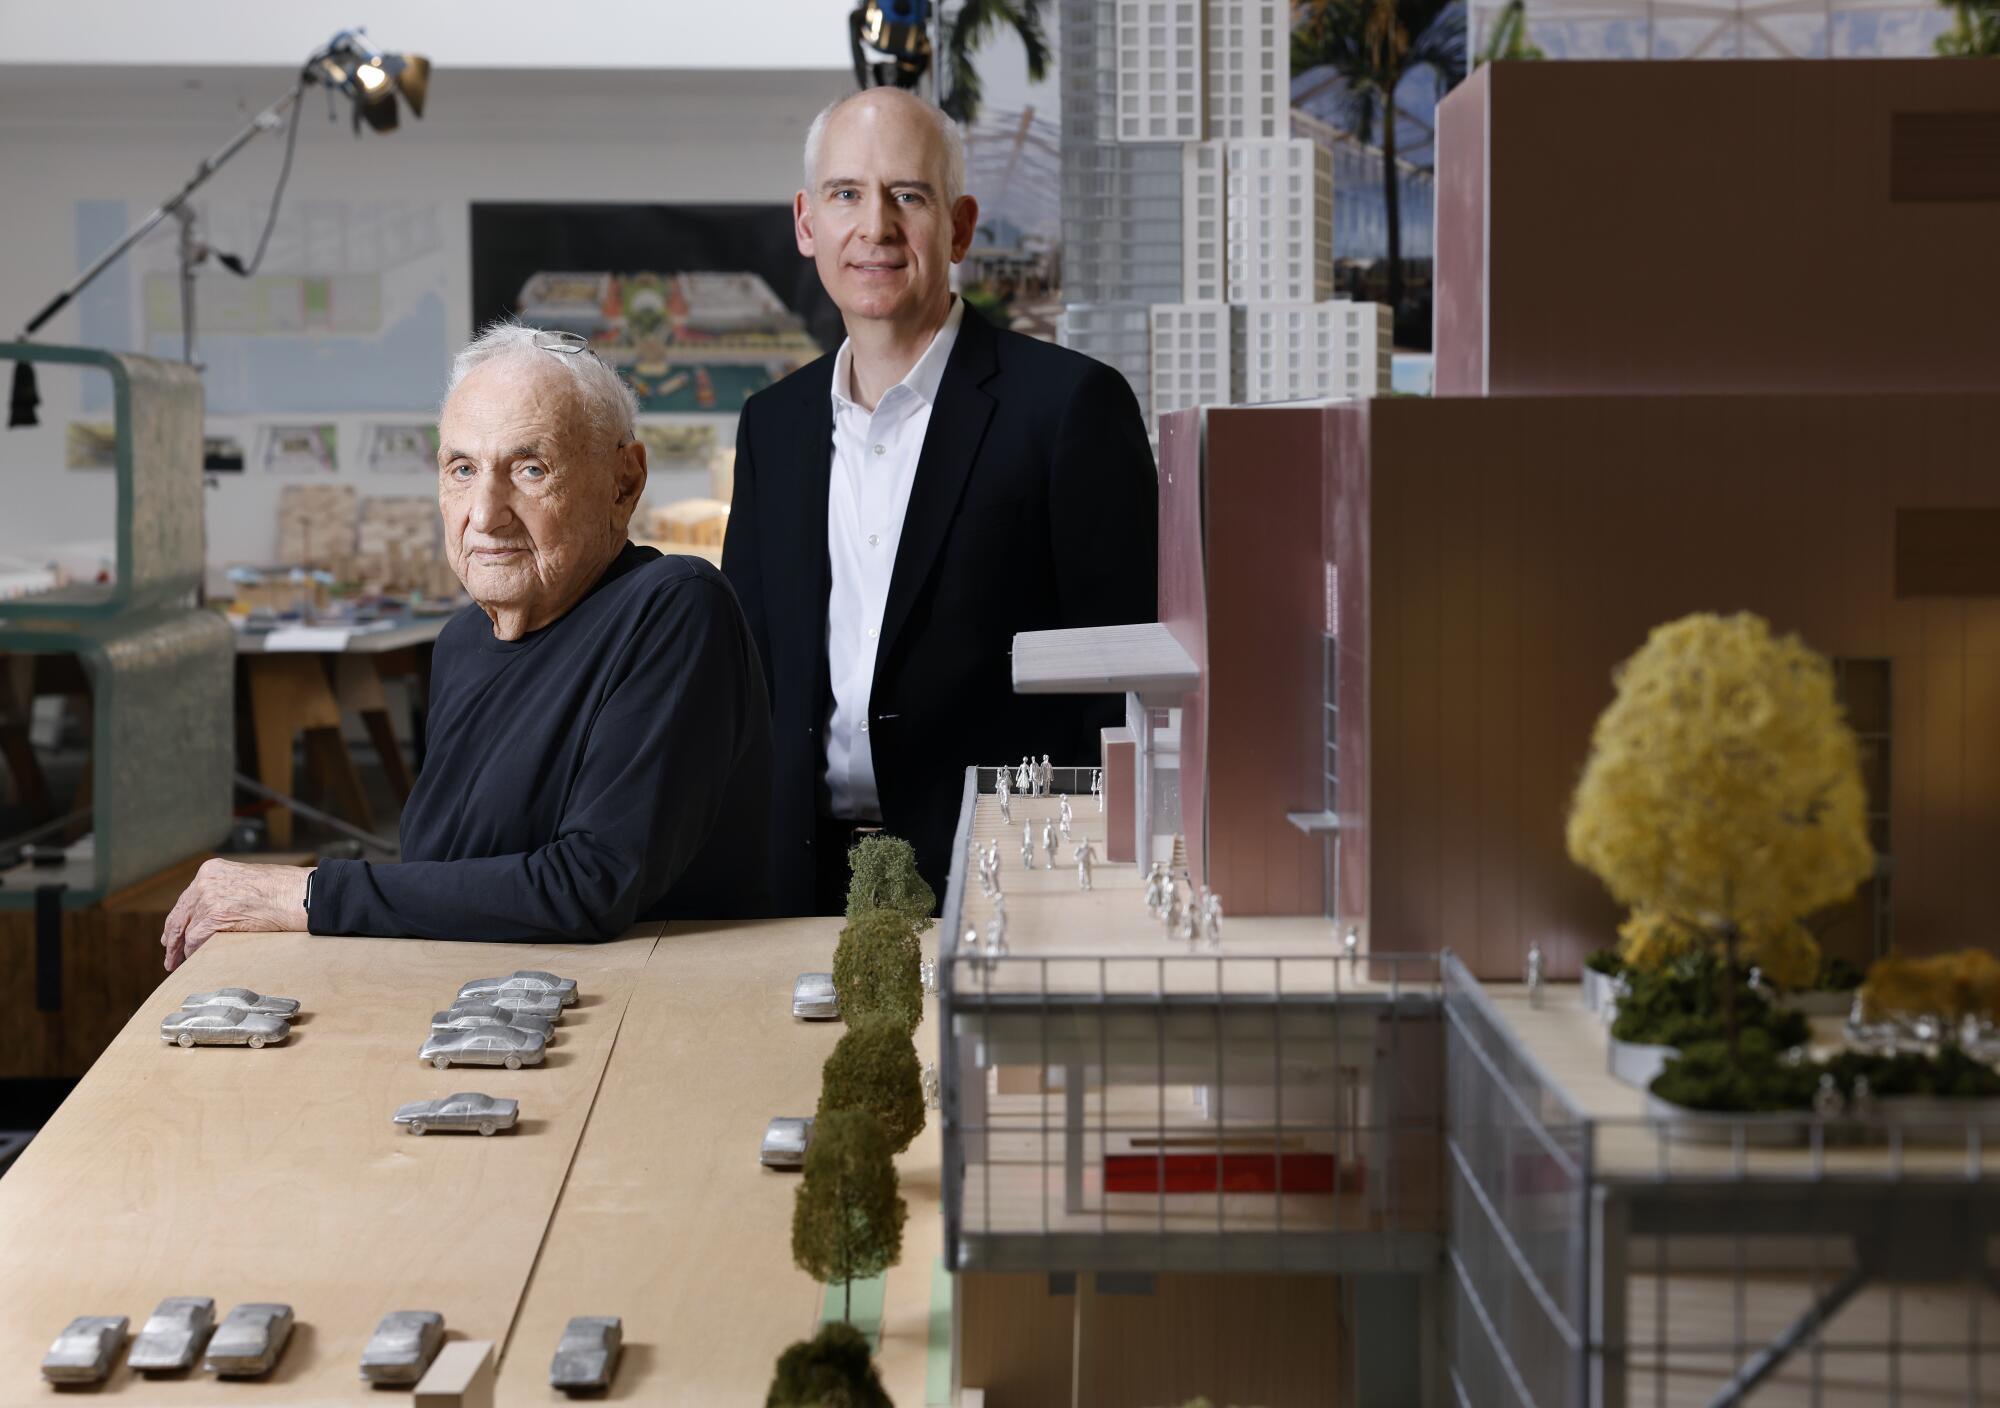 Architect Frank Gehry, left, and Colburn School President Sel Karden 